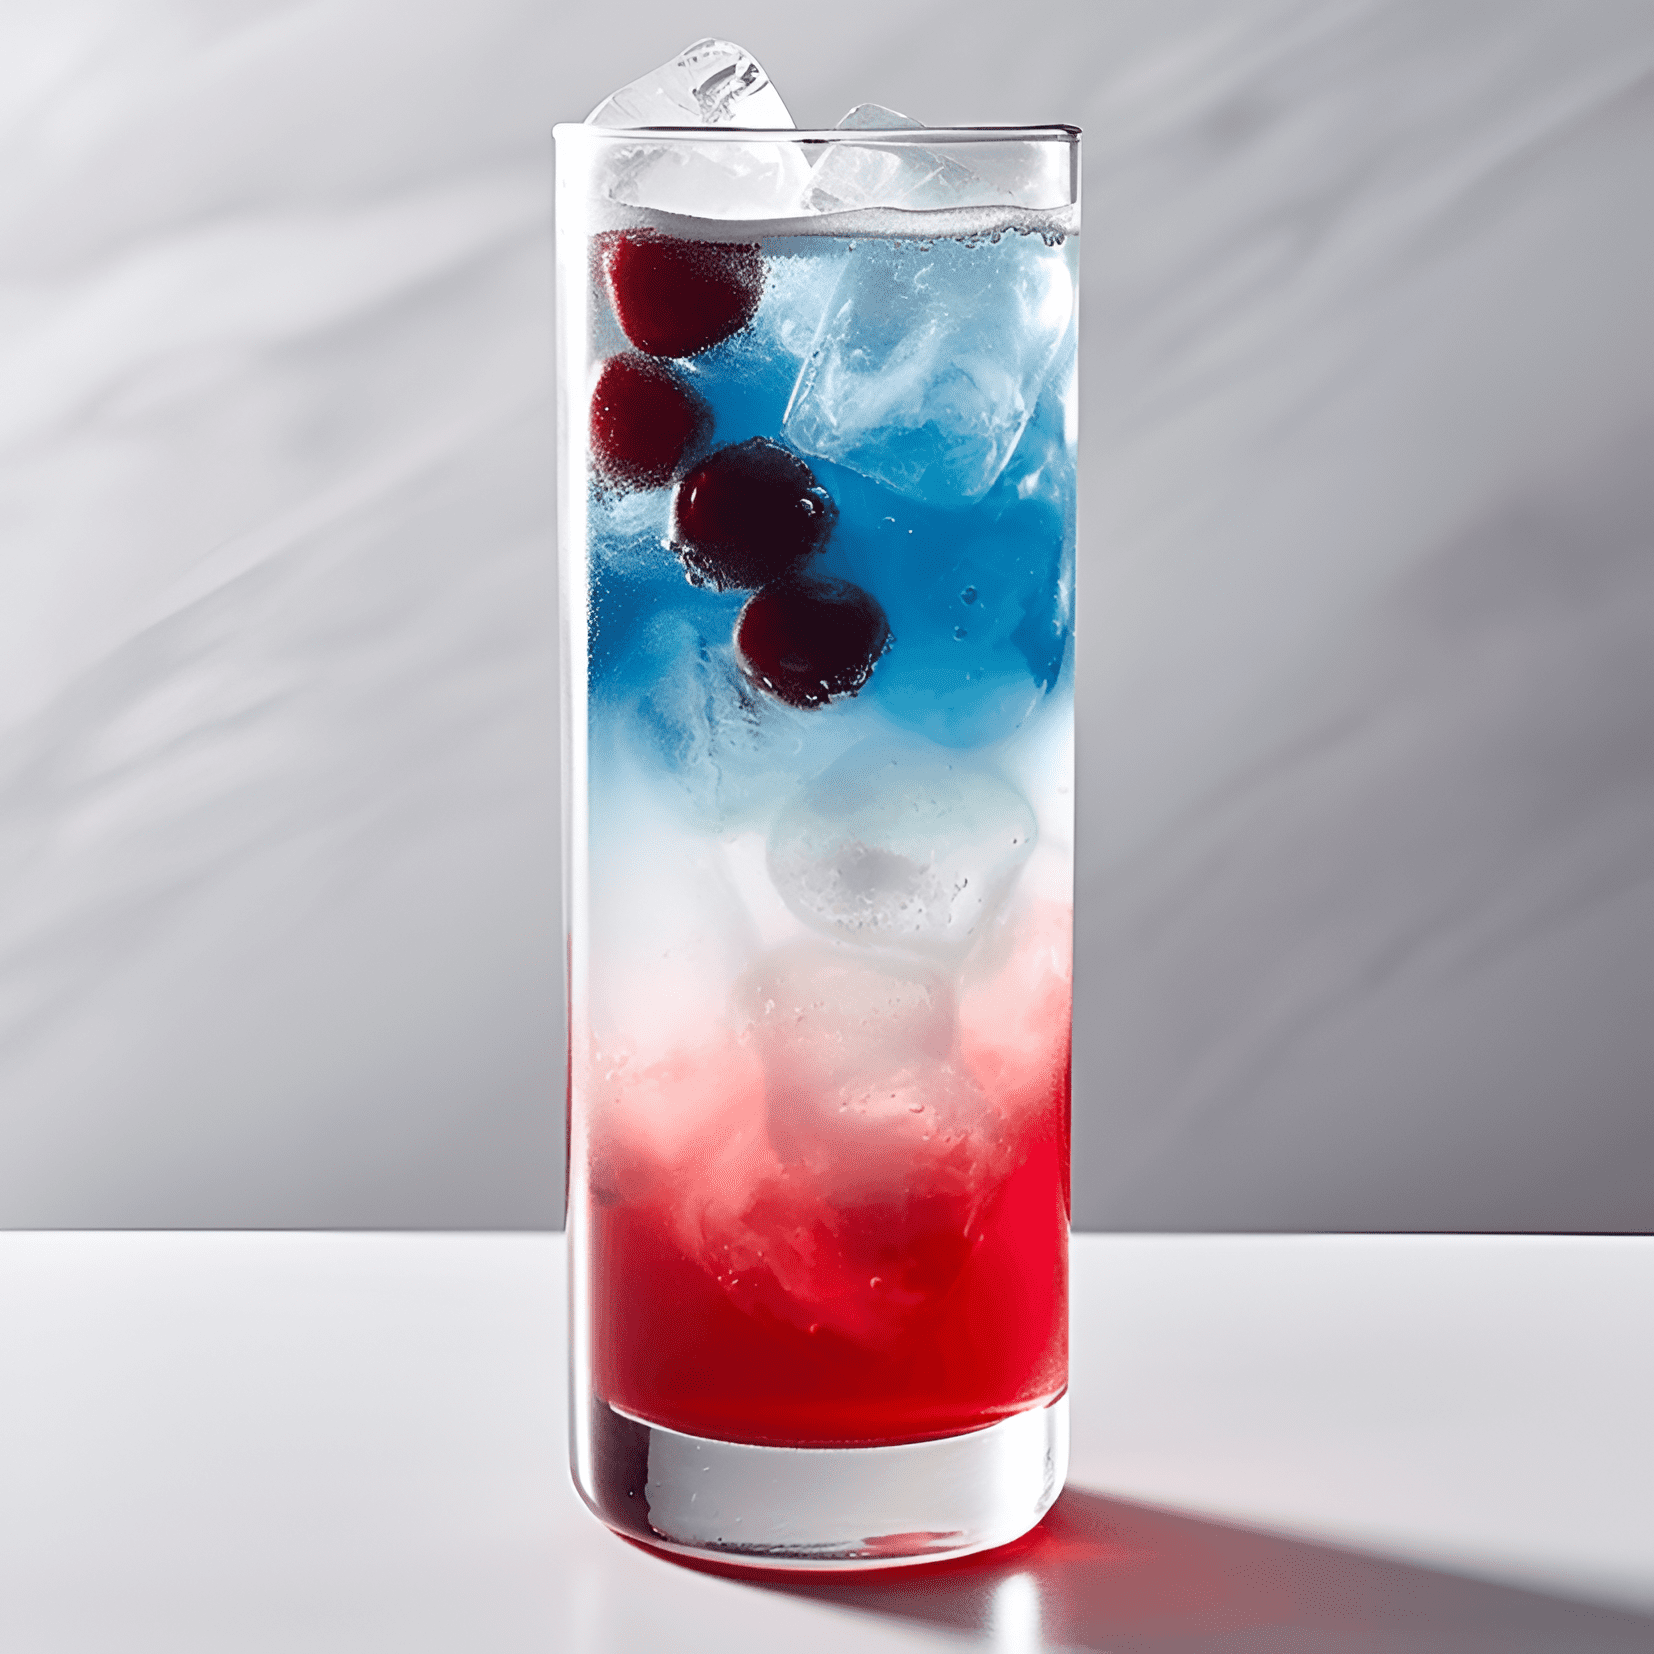 Red, White, and Blue Cocktail Recipe - The Red, White, and Blue cocktail offers a delightful combination of sweet, fruity, and slightly tart flavors. The grenadine provides a sweet and tangy base, while the blue curaçao adds a hint of citrus and tropical fruit. The cream layer balances out the flavors with its smooth and velvety texture.